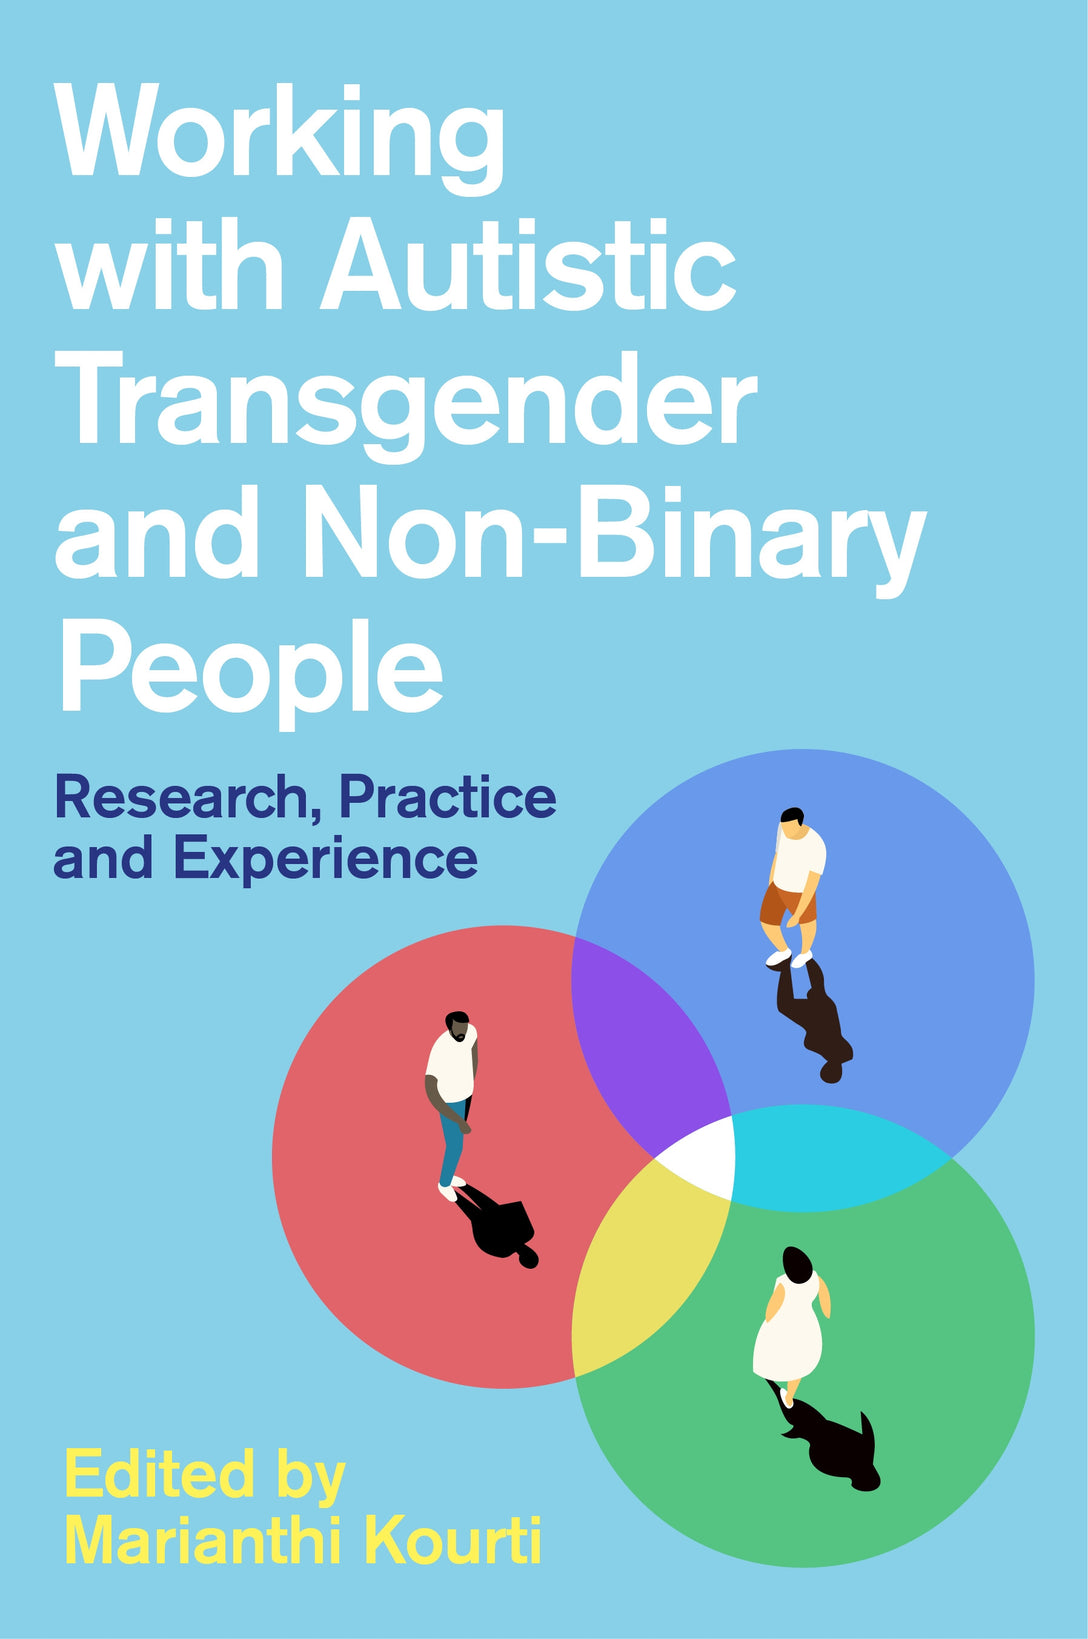 Working with Autistic Transgender and Non-Binary People by No Author Listed, Marianthi Kourti